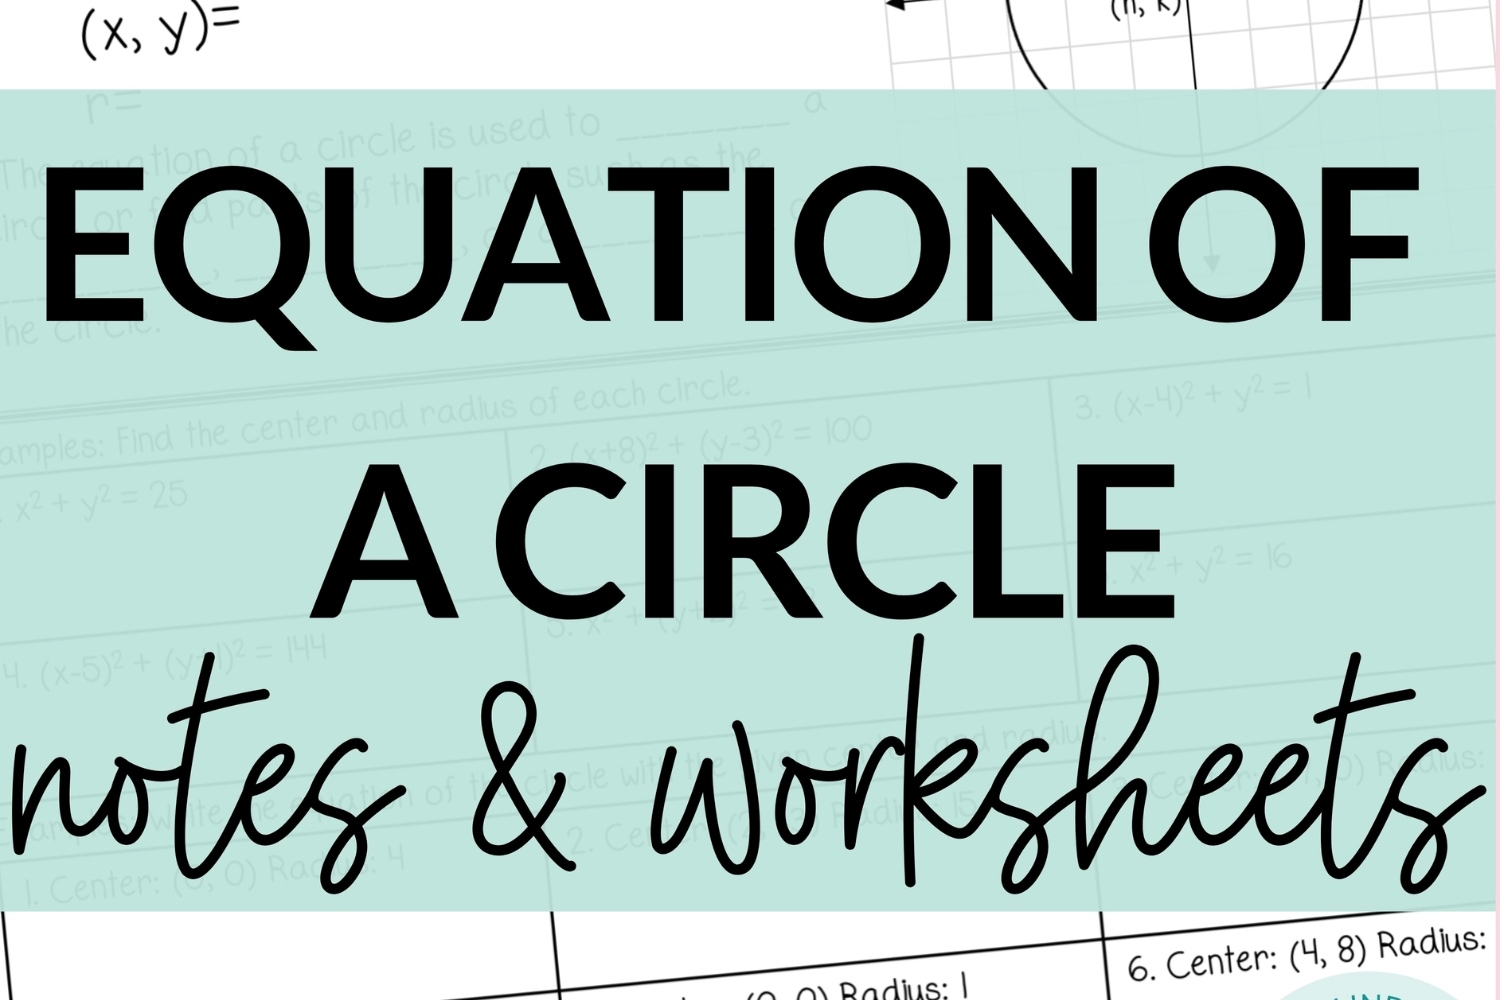 Discover The Radius Of This Mysterious Circle Equation!